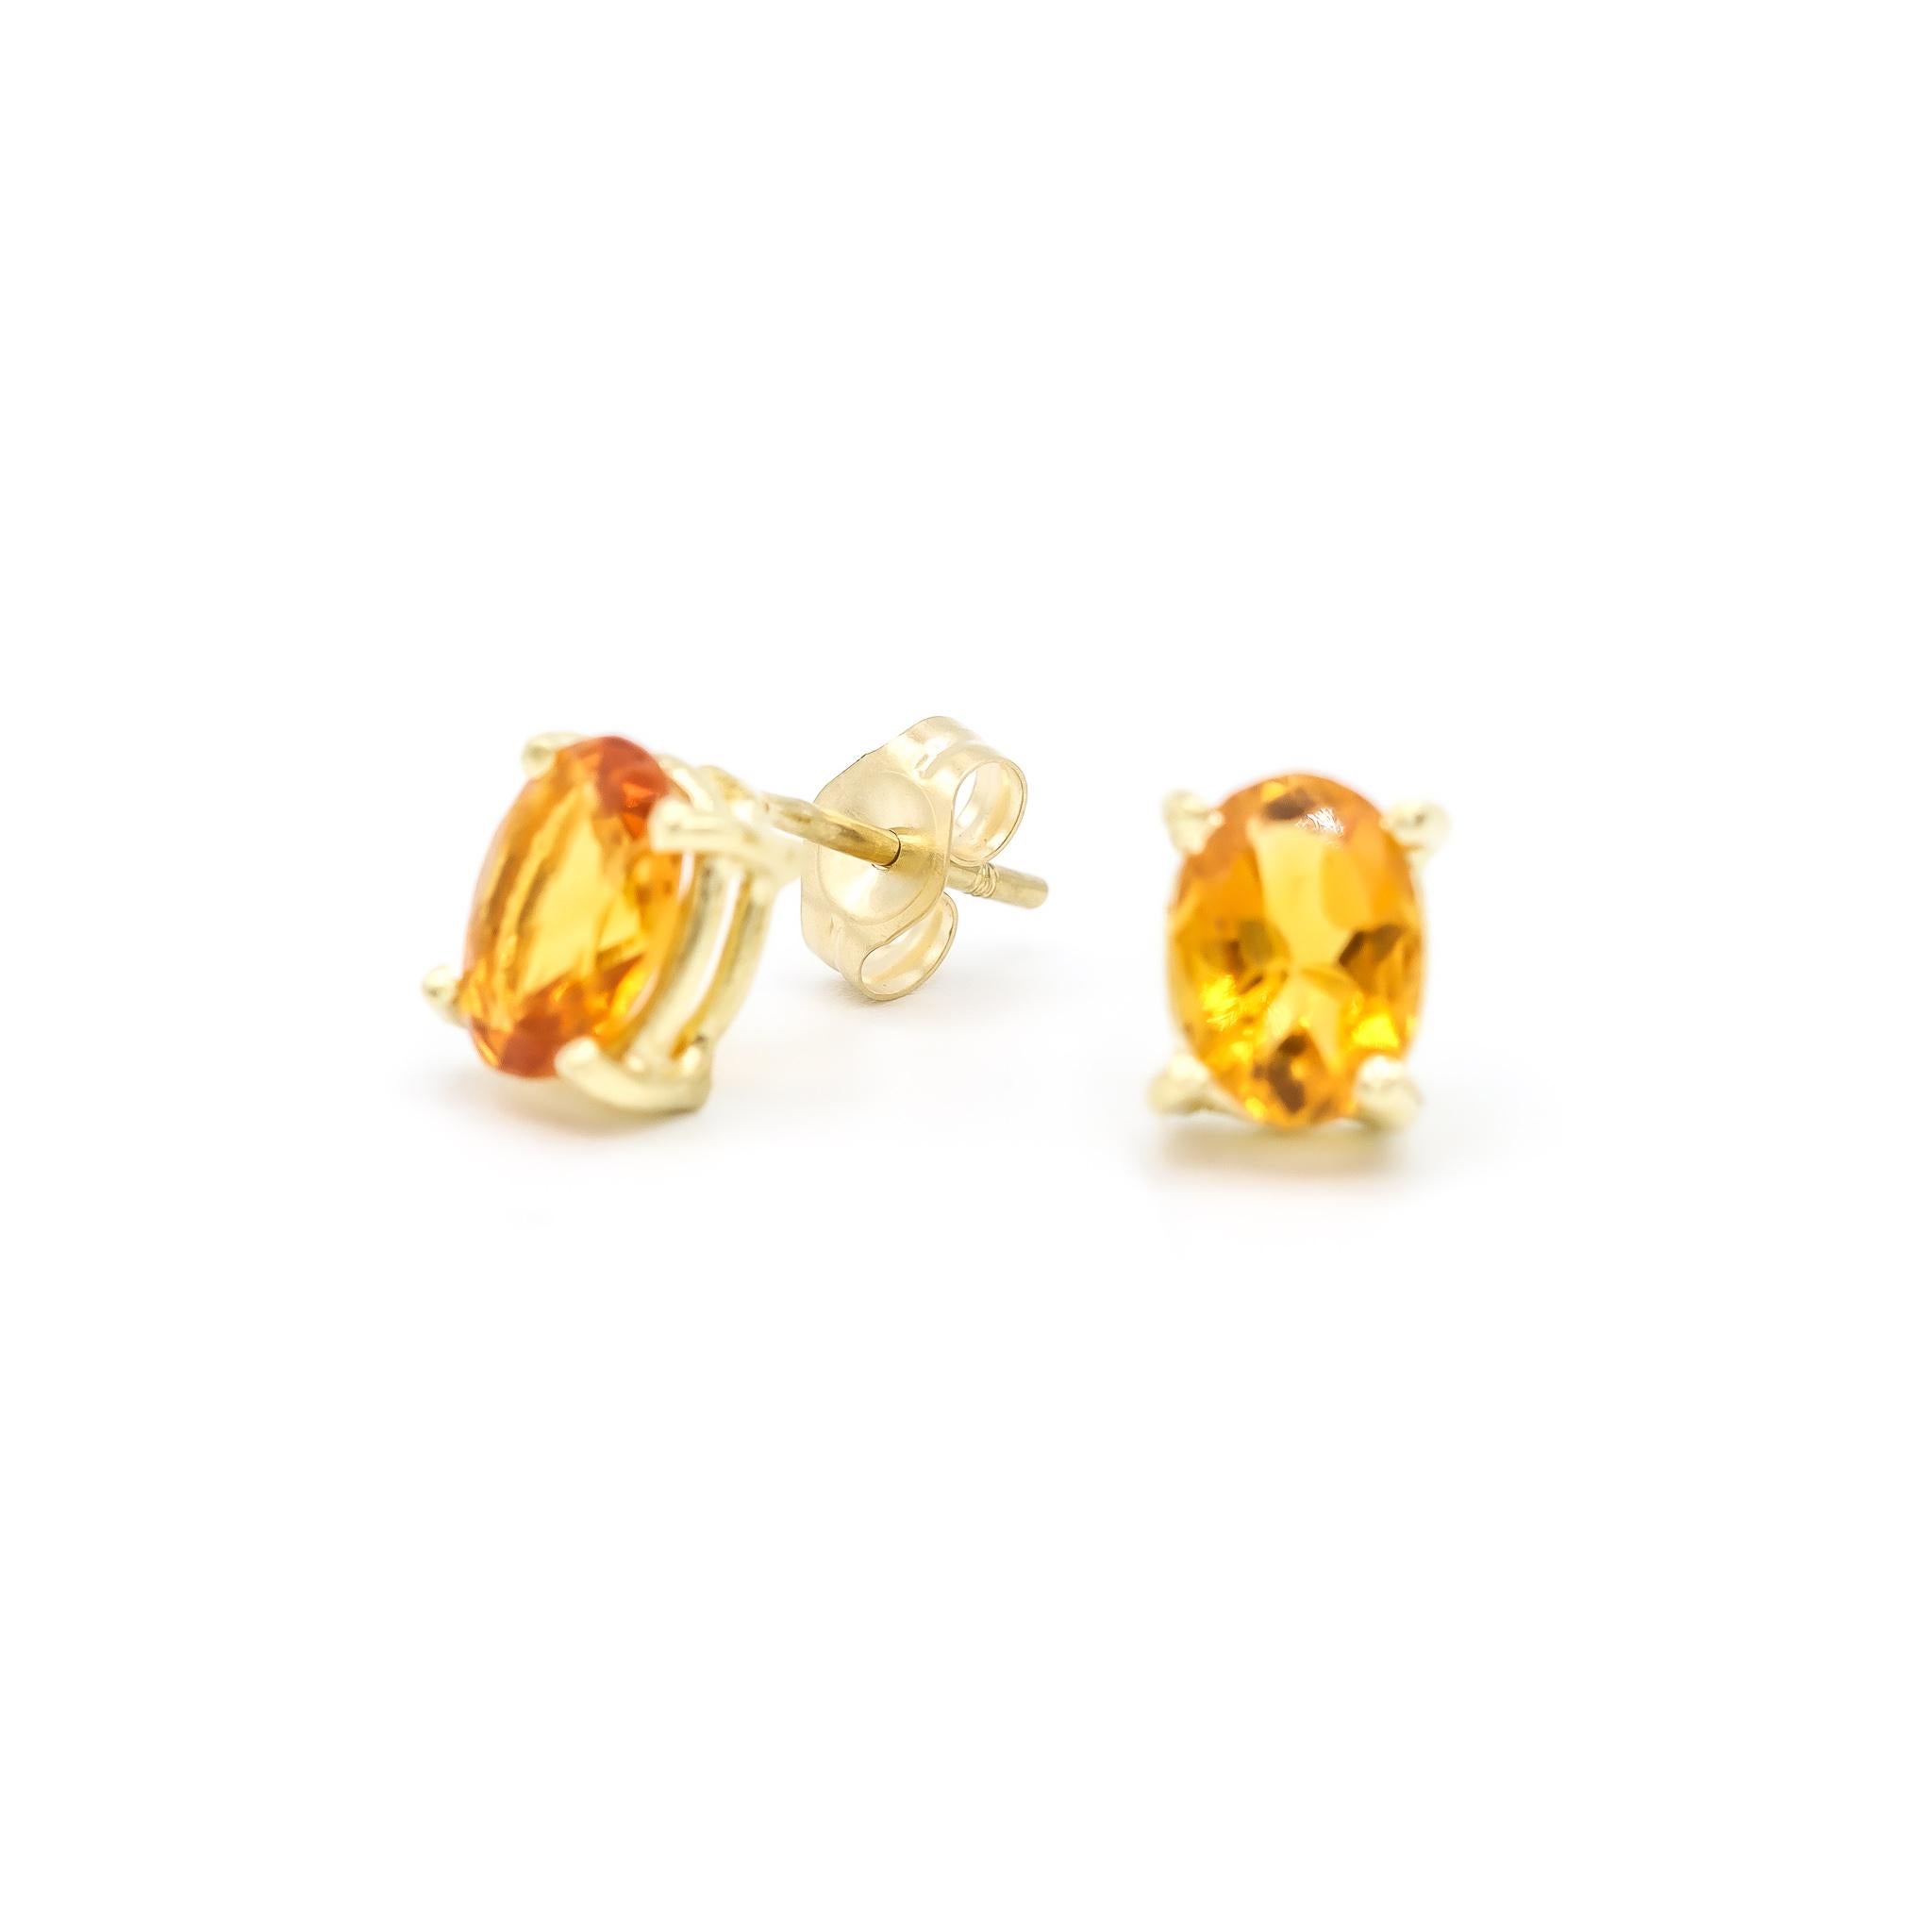 One pair of lady's custom made polished 14K yellow gold, diamond and citrine stud earrings with push backs. The earrings measure approximately 0.13 inches in length and weigh a total of 1.50 grams. Engraved with 